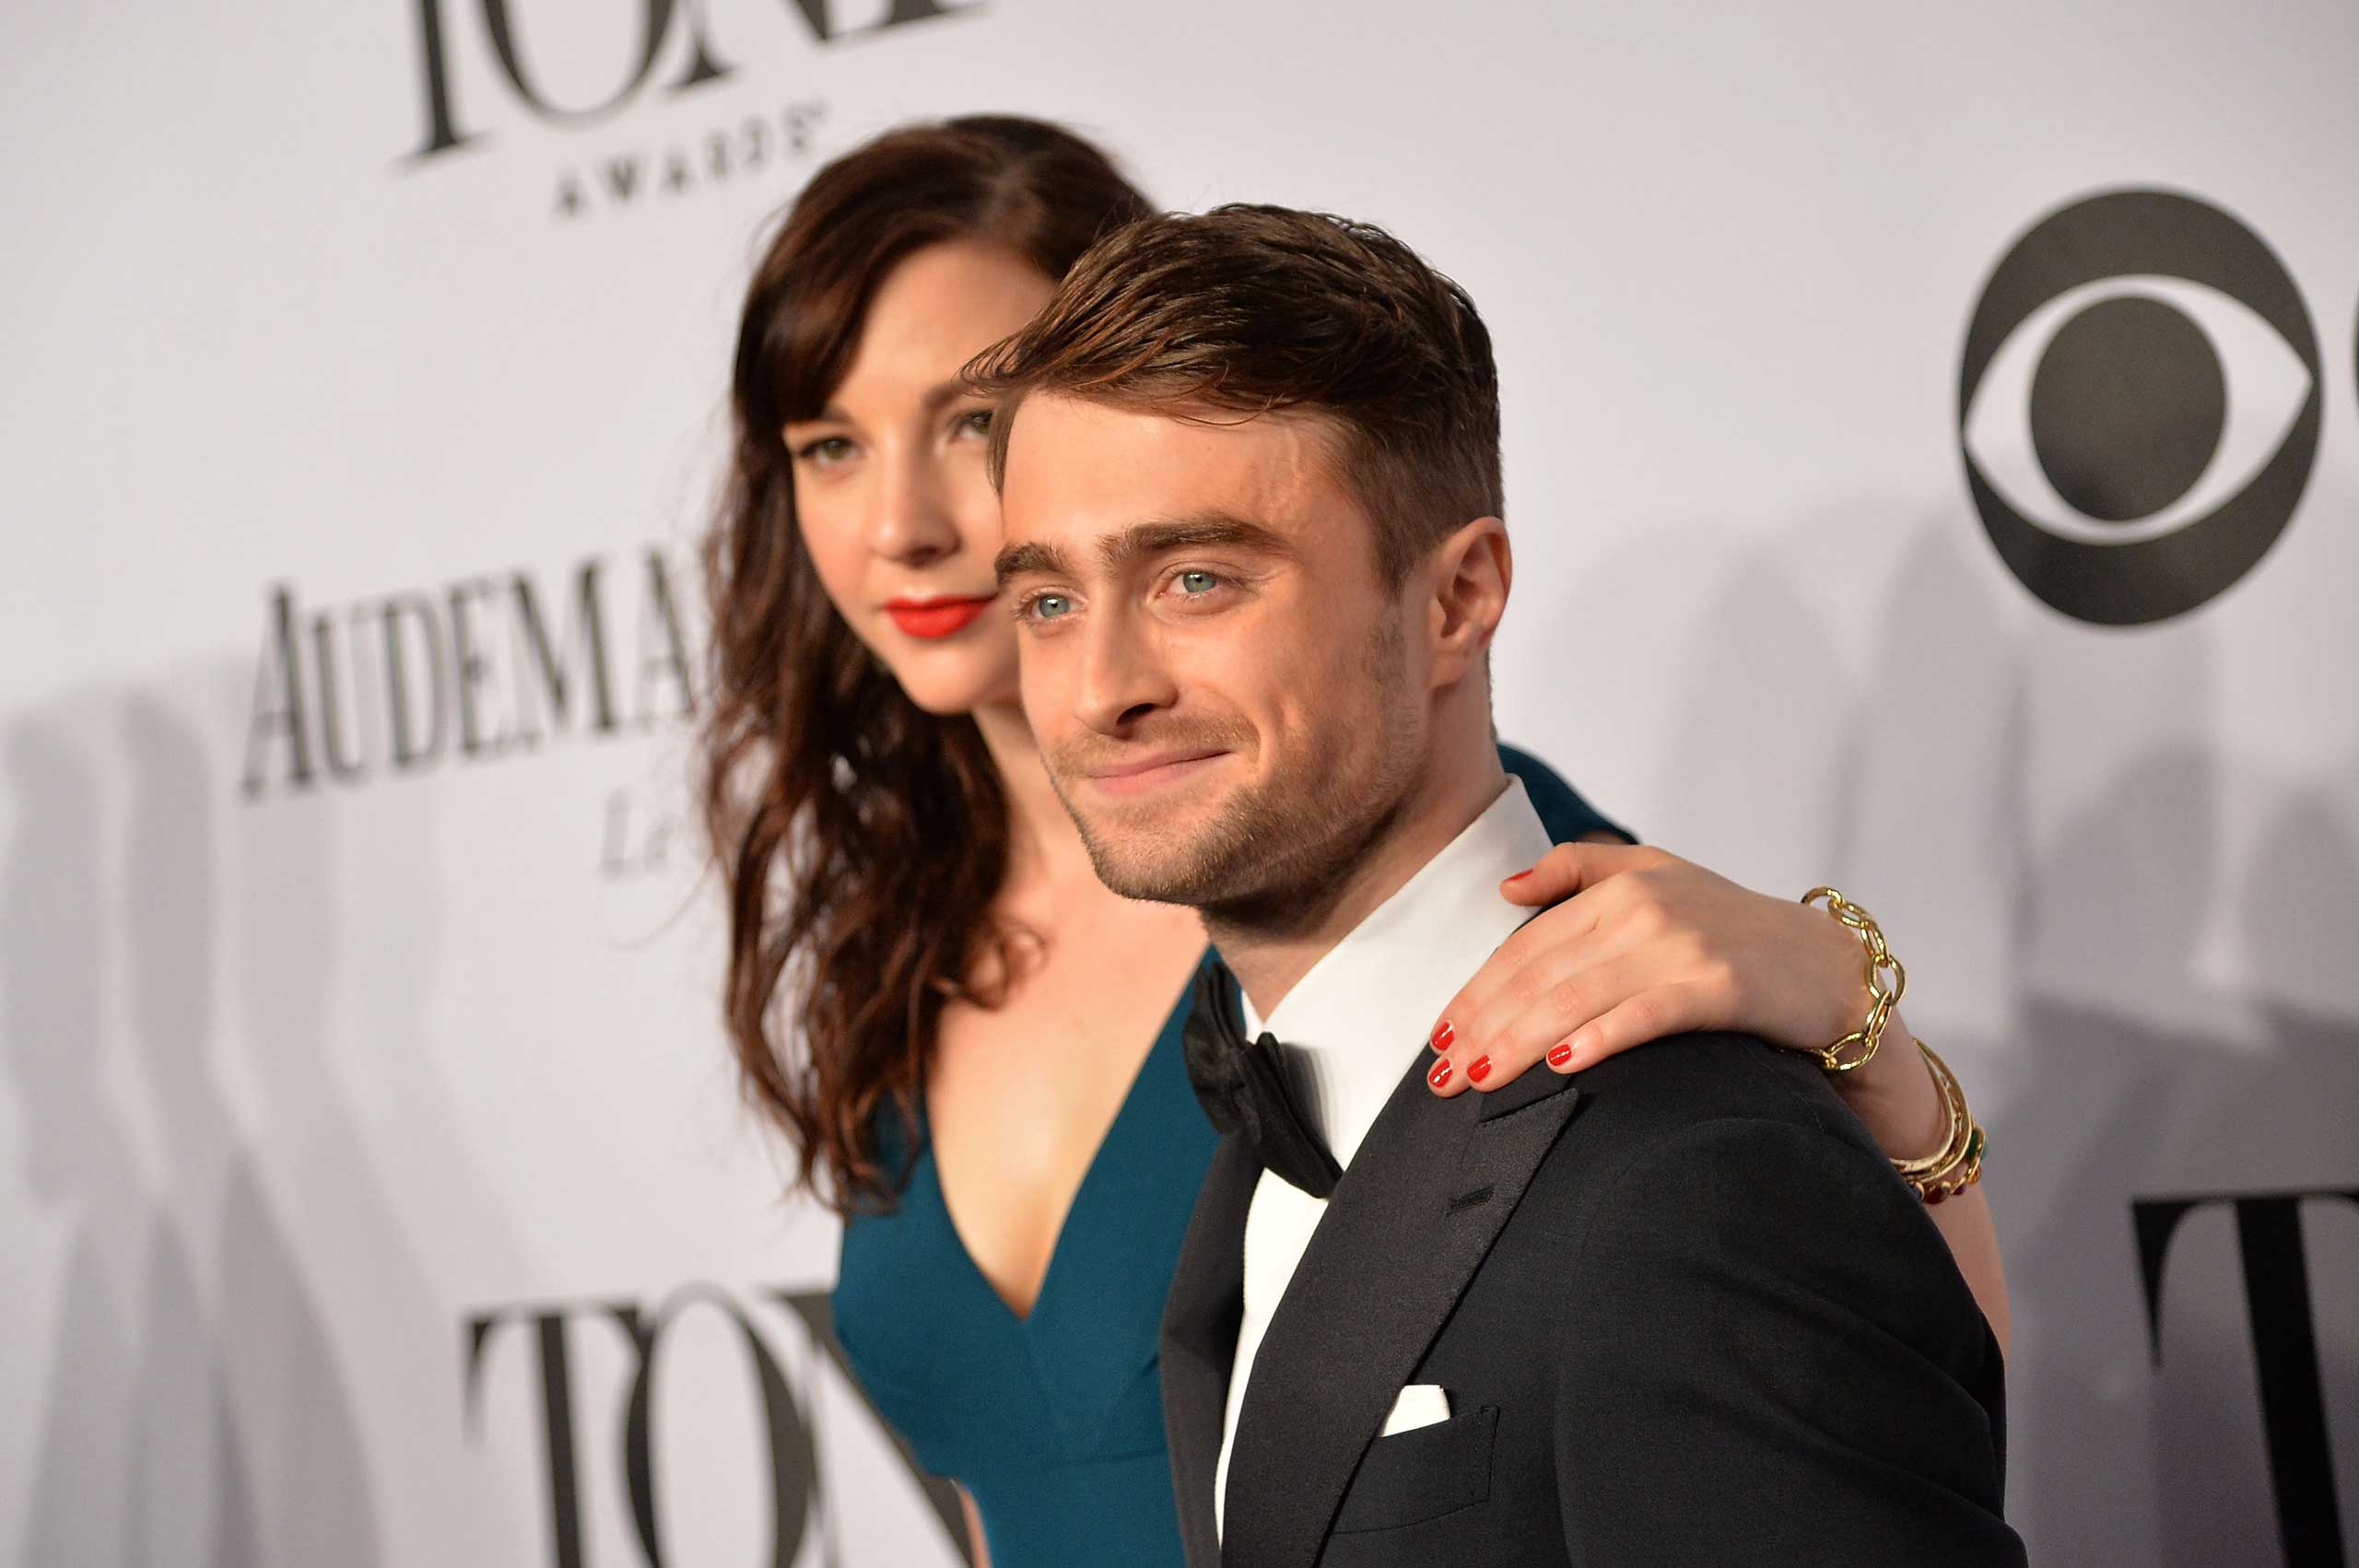 Daniel Radcliffe and Erin Darke at the 68th Annual Tony Awards in New York, June 8, 2014. (Mike Coppola—Getty Images)